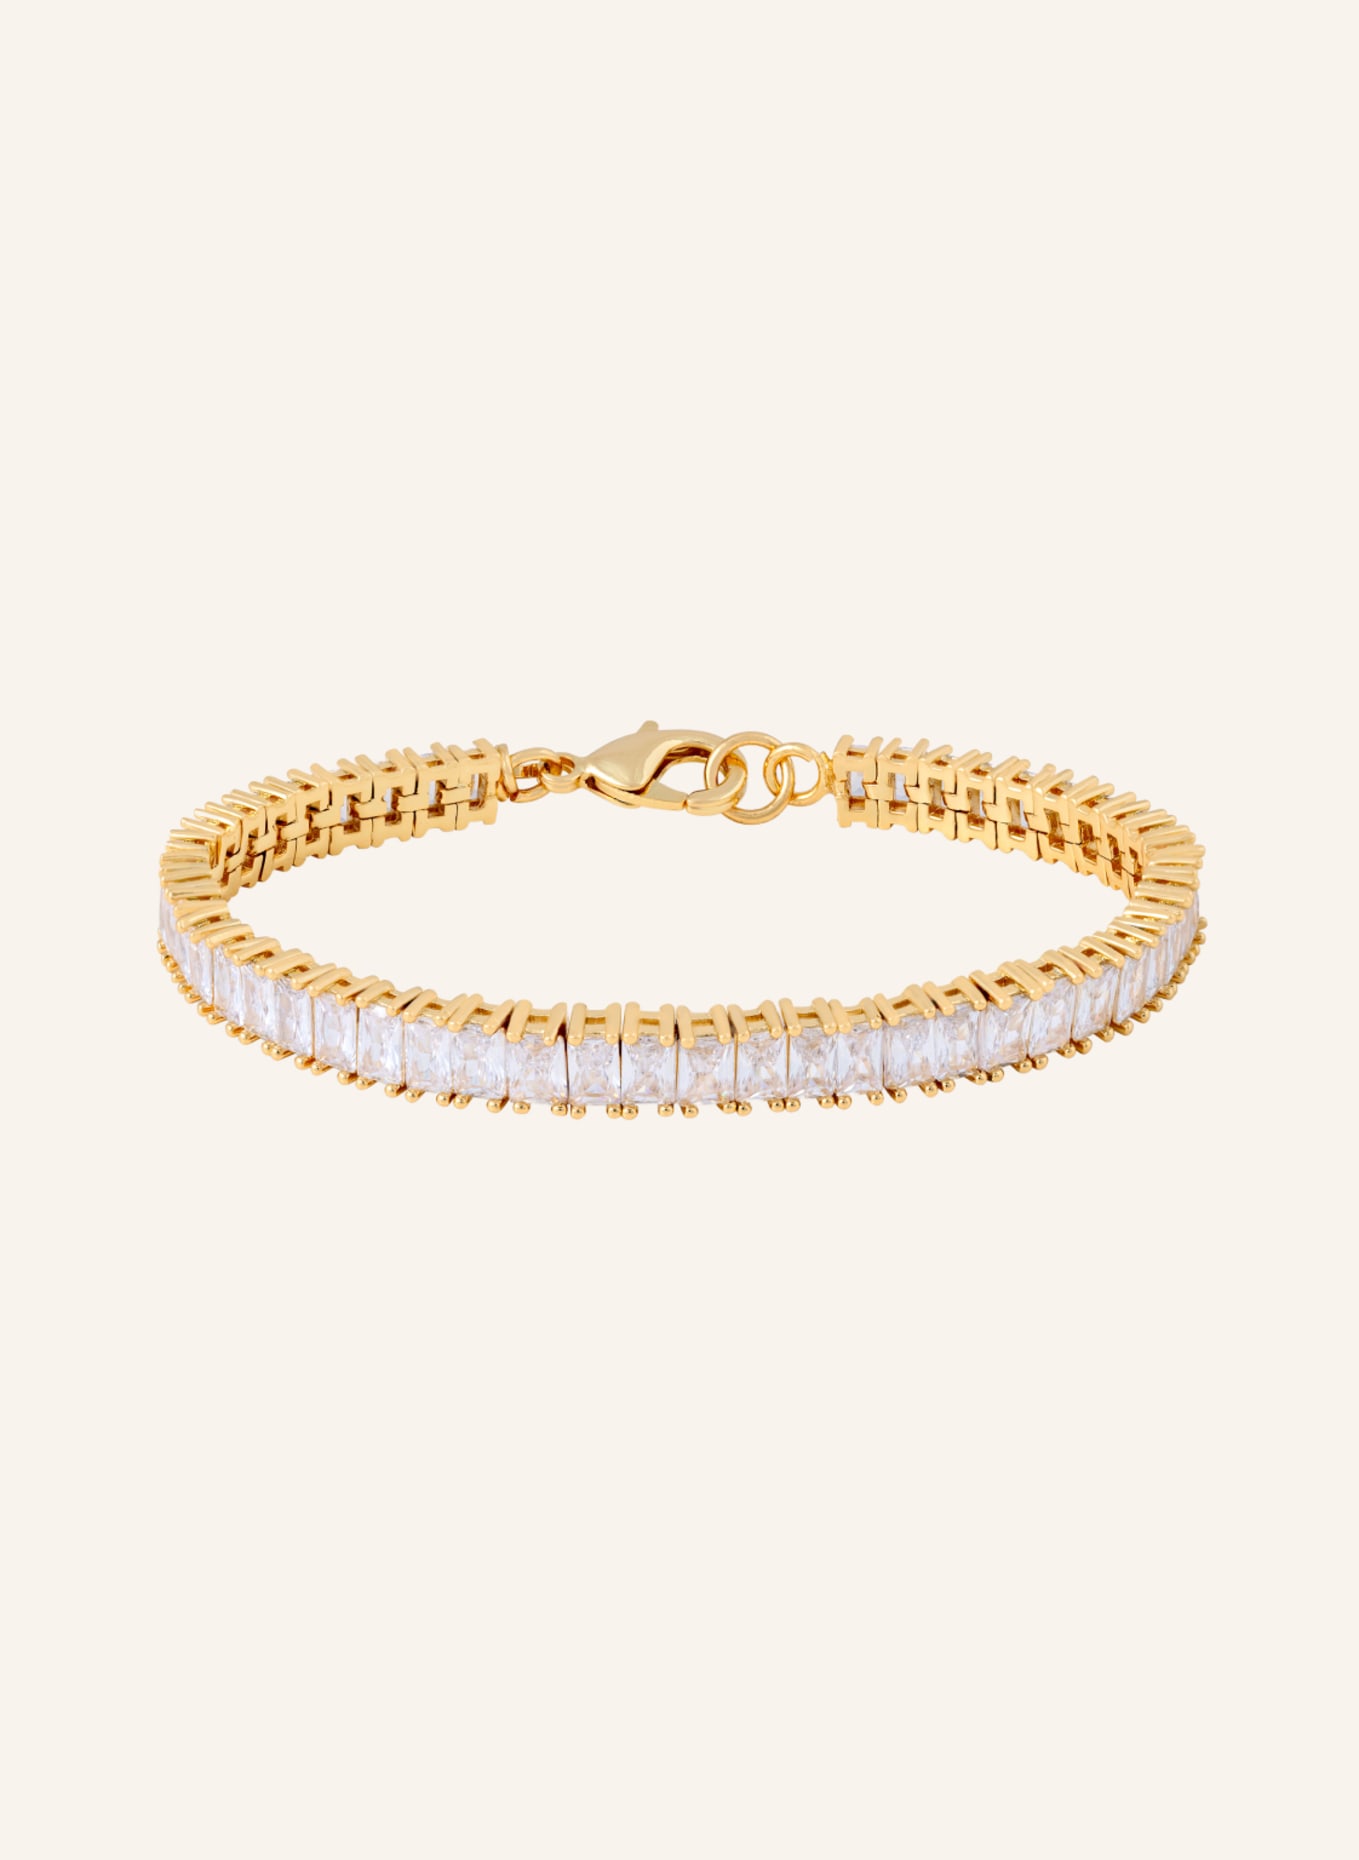 CRYSTAL HAZE Armband BAGUETTE by GLAMBOU, Farbe: GOLD (Bild 1)